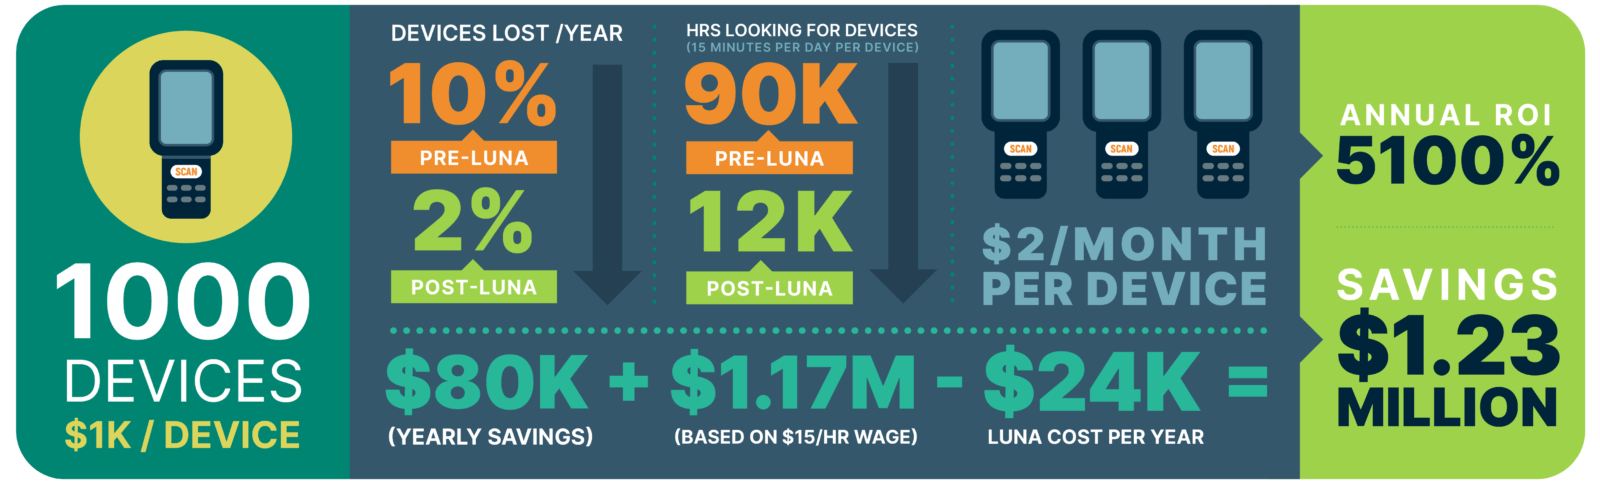 Luna Device Tracking ROI Infographic